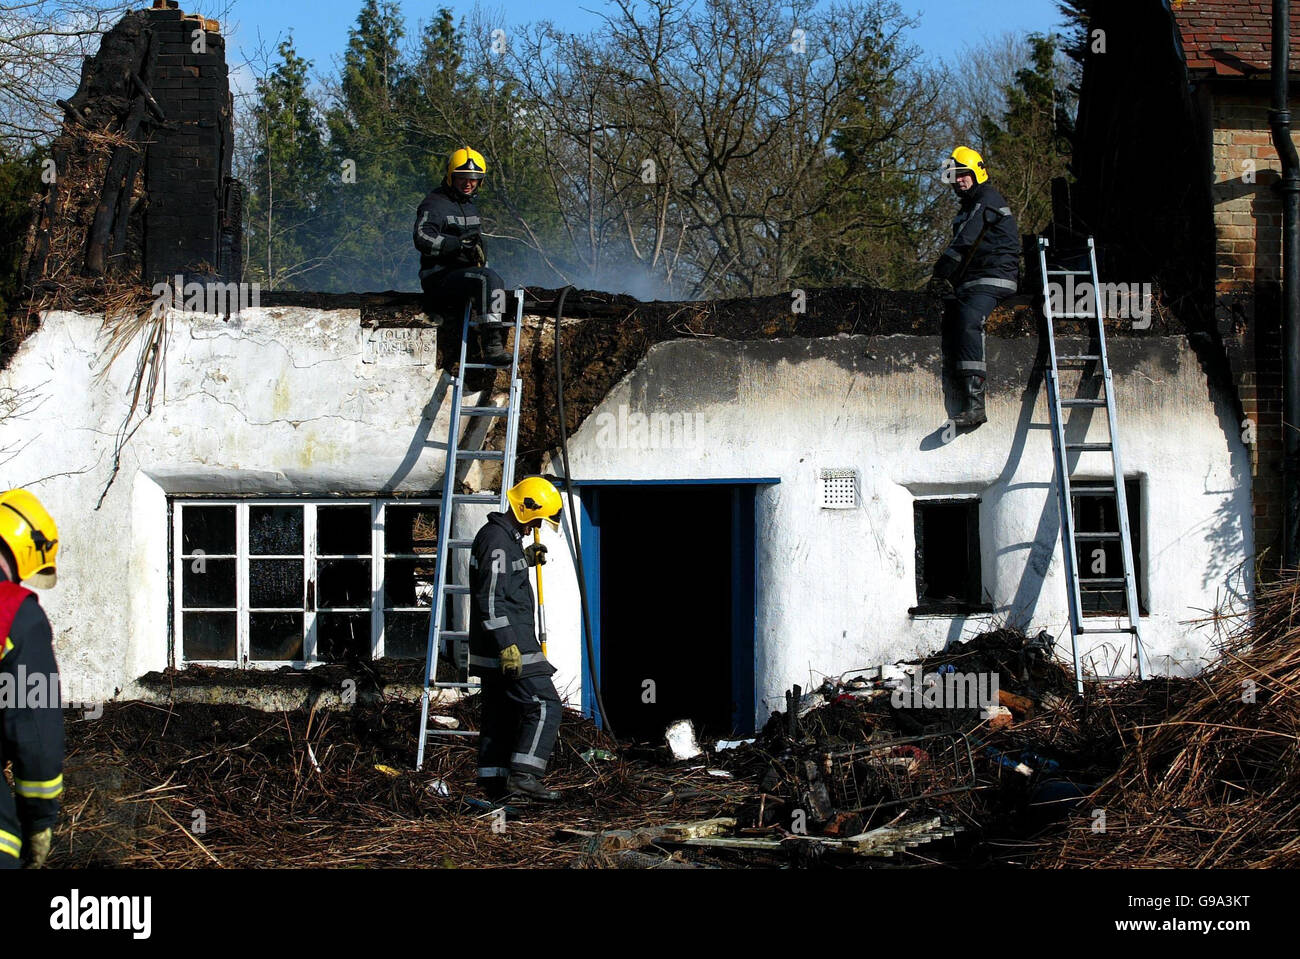 Firefighters make safe the wreckage of film director Ken Russell's home after it was destroyed by fire, Monday April 3 2006. The thatched cottage in East Boldre in the New Forest, Hampshire was engulfed by flames while Mr Russell was at the Post Office. See PA story FIRE Russell. PRESS ASSOCIATION photo. Picture credit should read: Chris Ison/PA Stock Photo